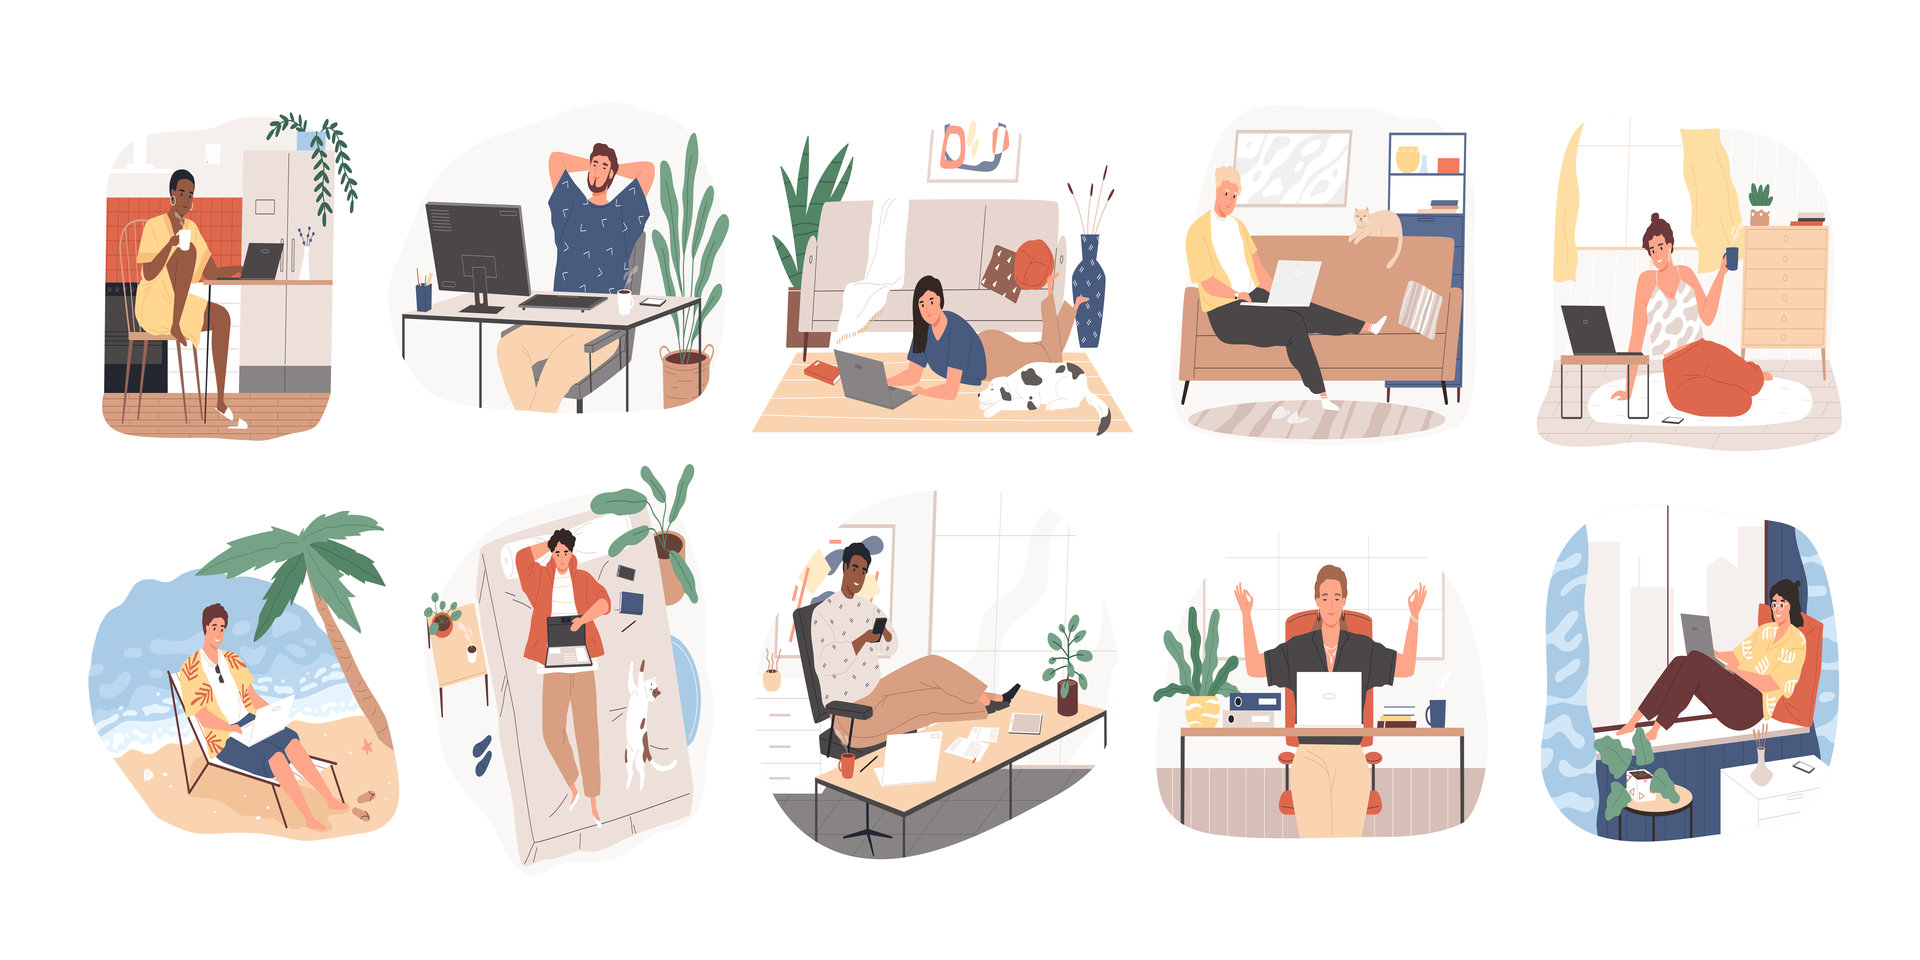 Several illustrations showing people working from home in different environments.